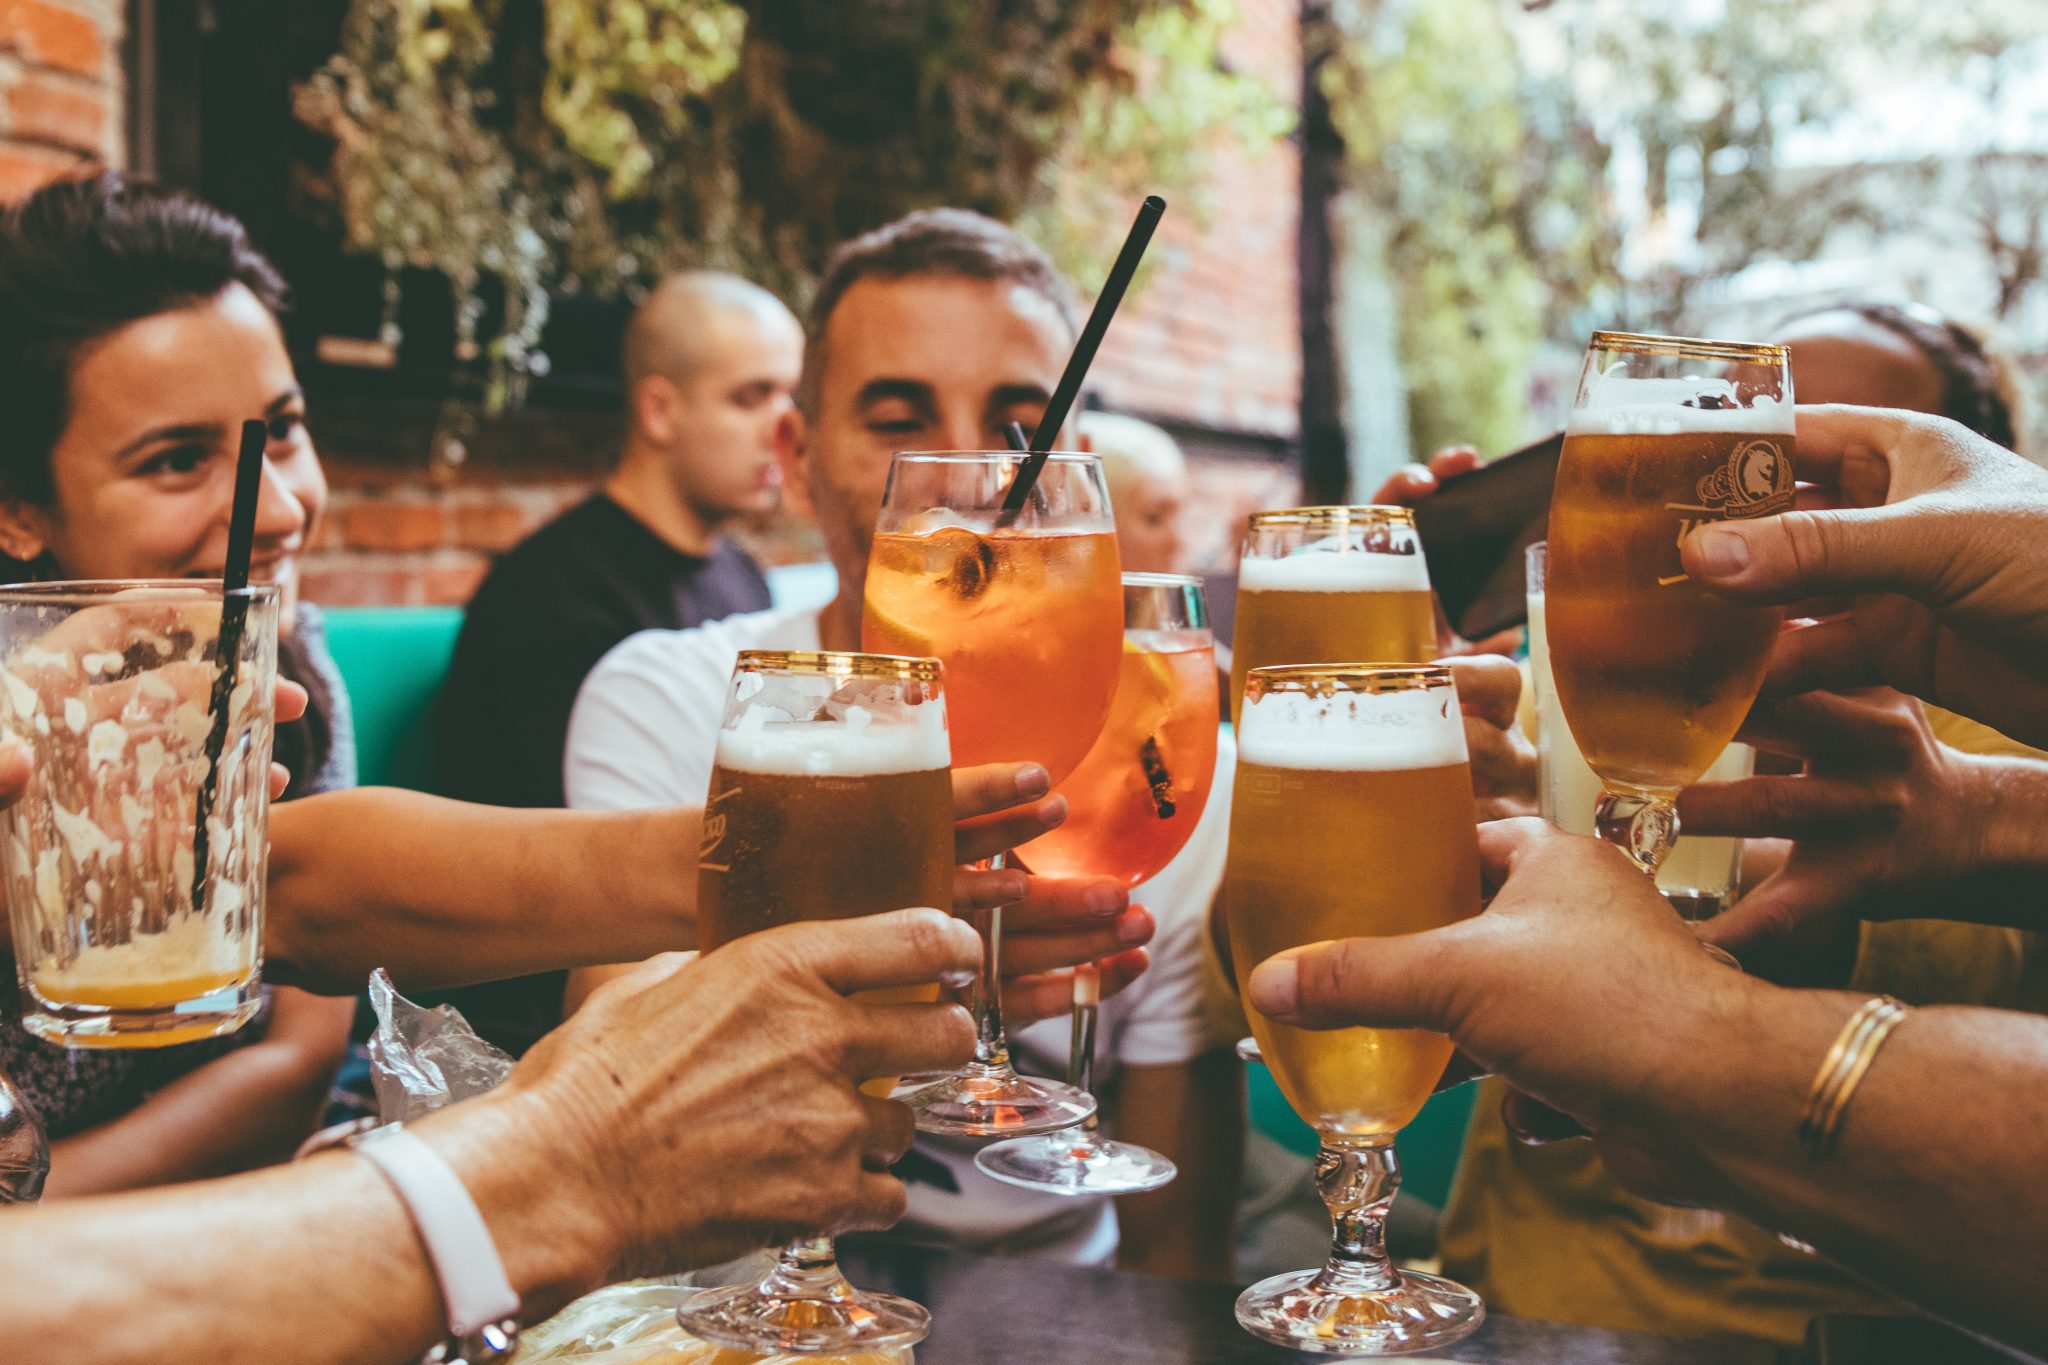 Can alcohol cause mood swings?